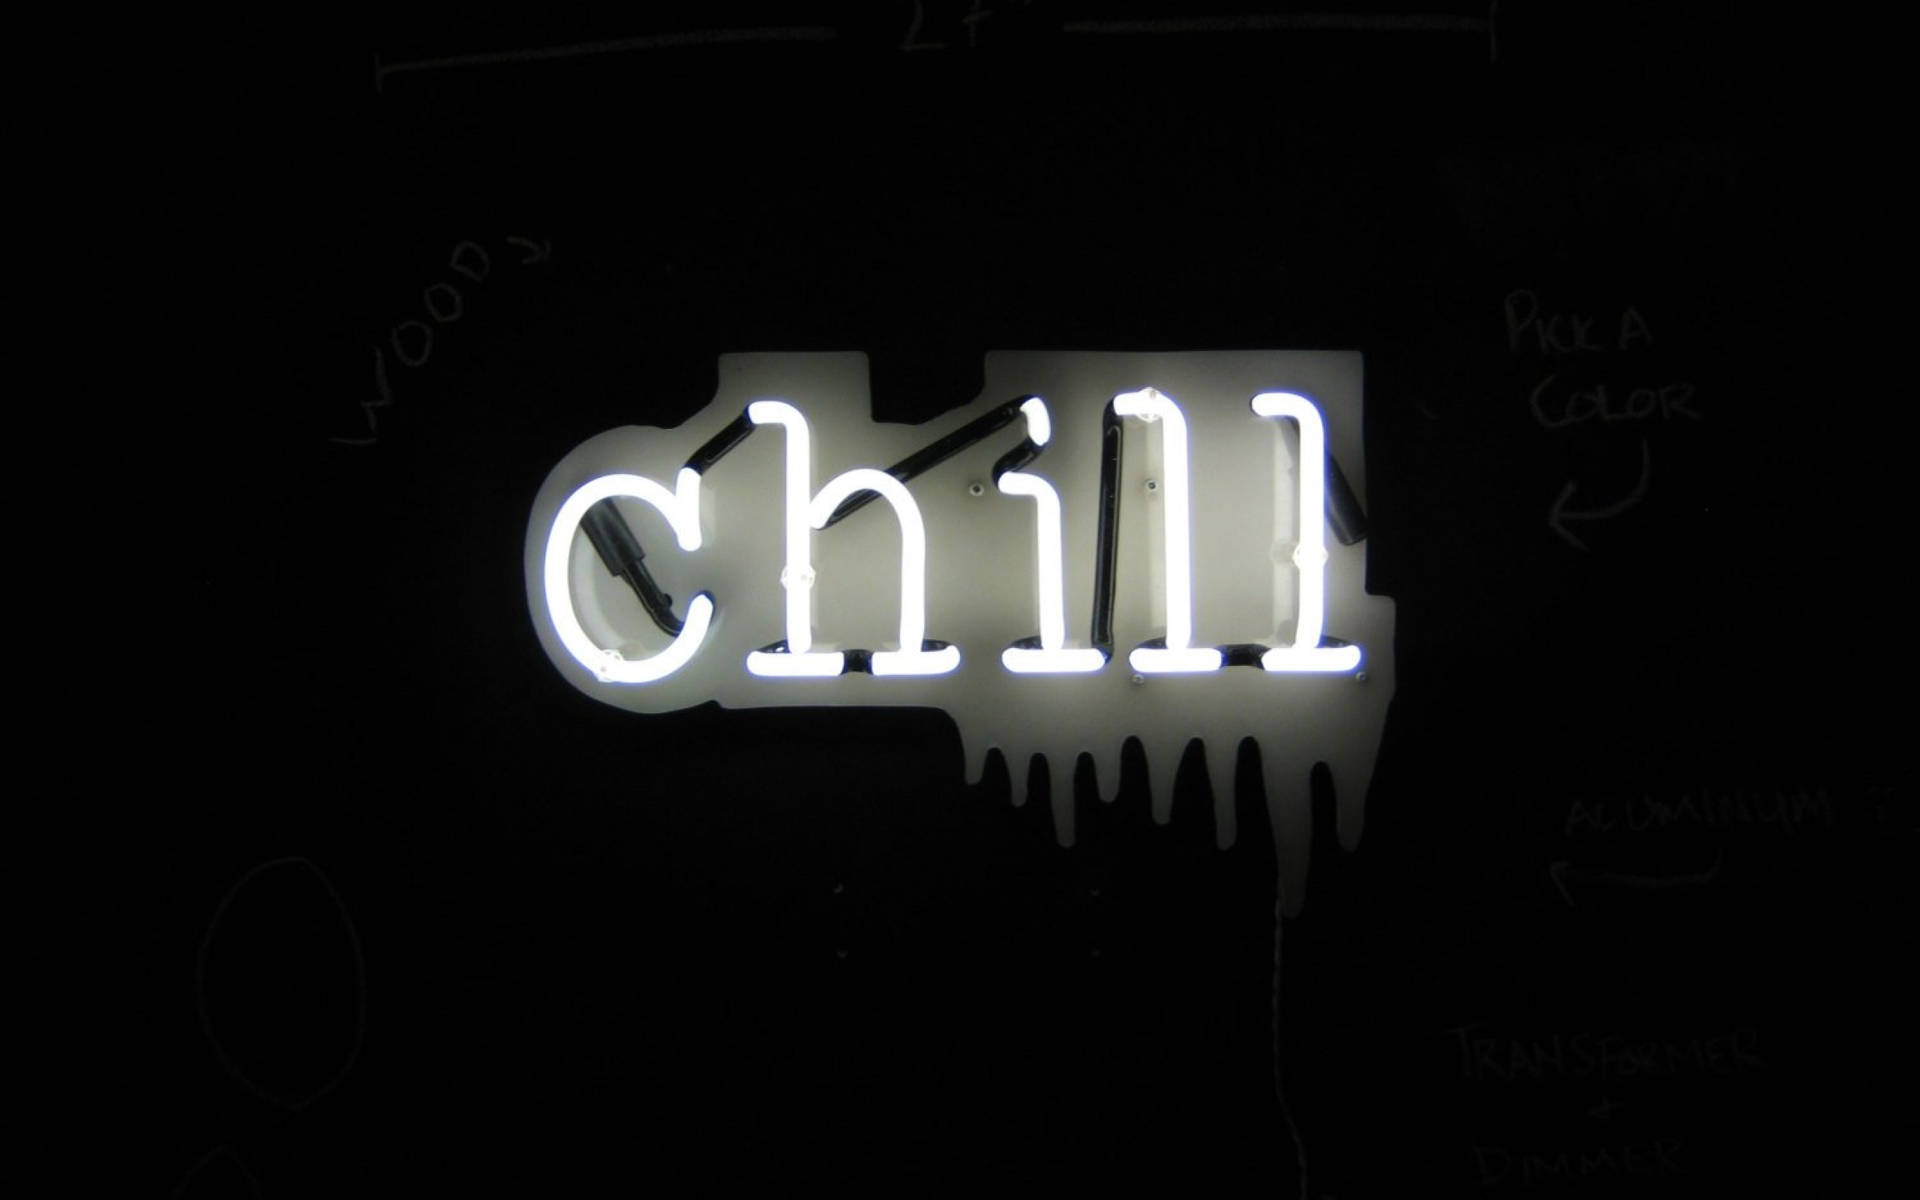 Chill Neon Light Signage Background